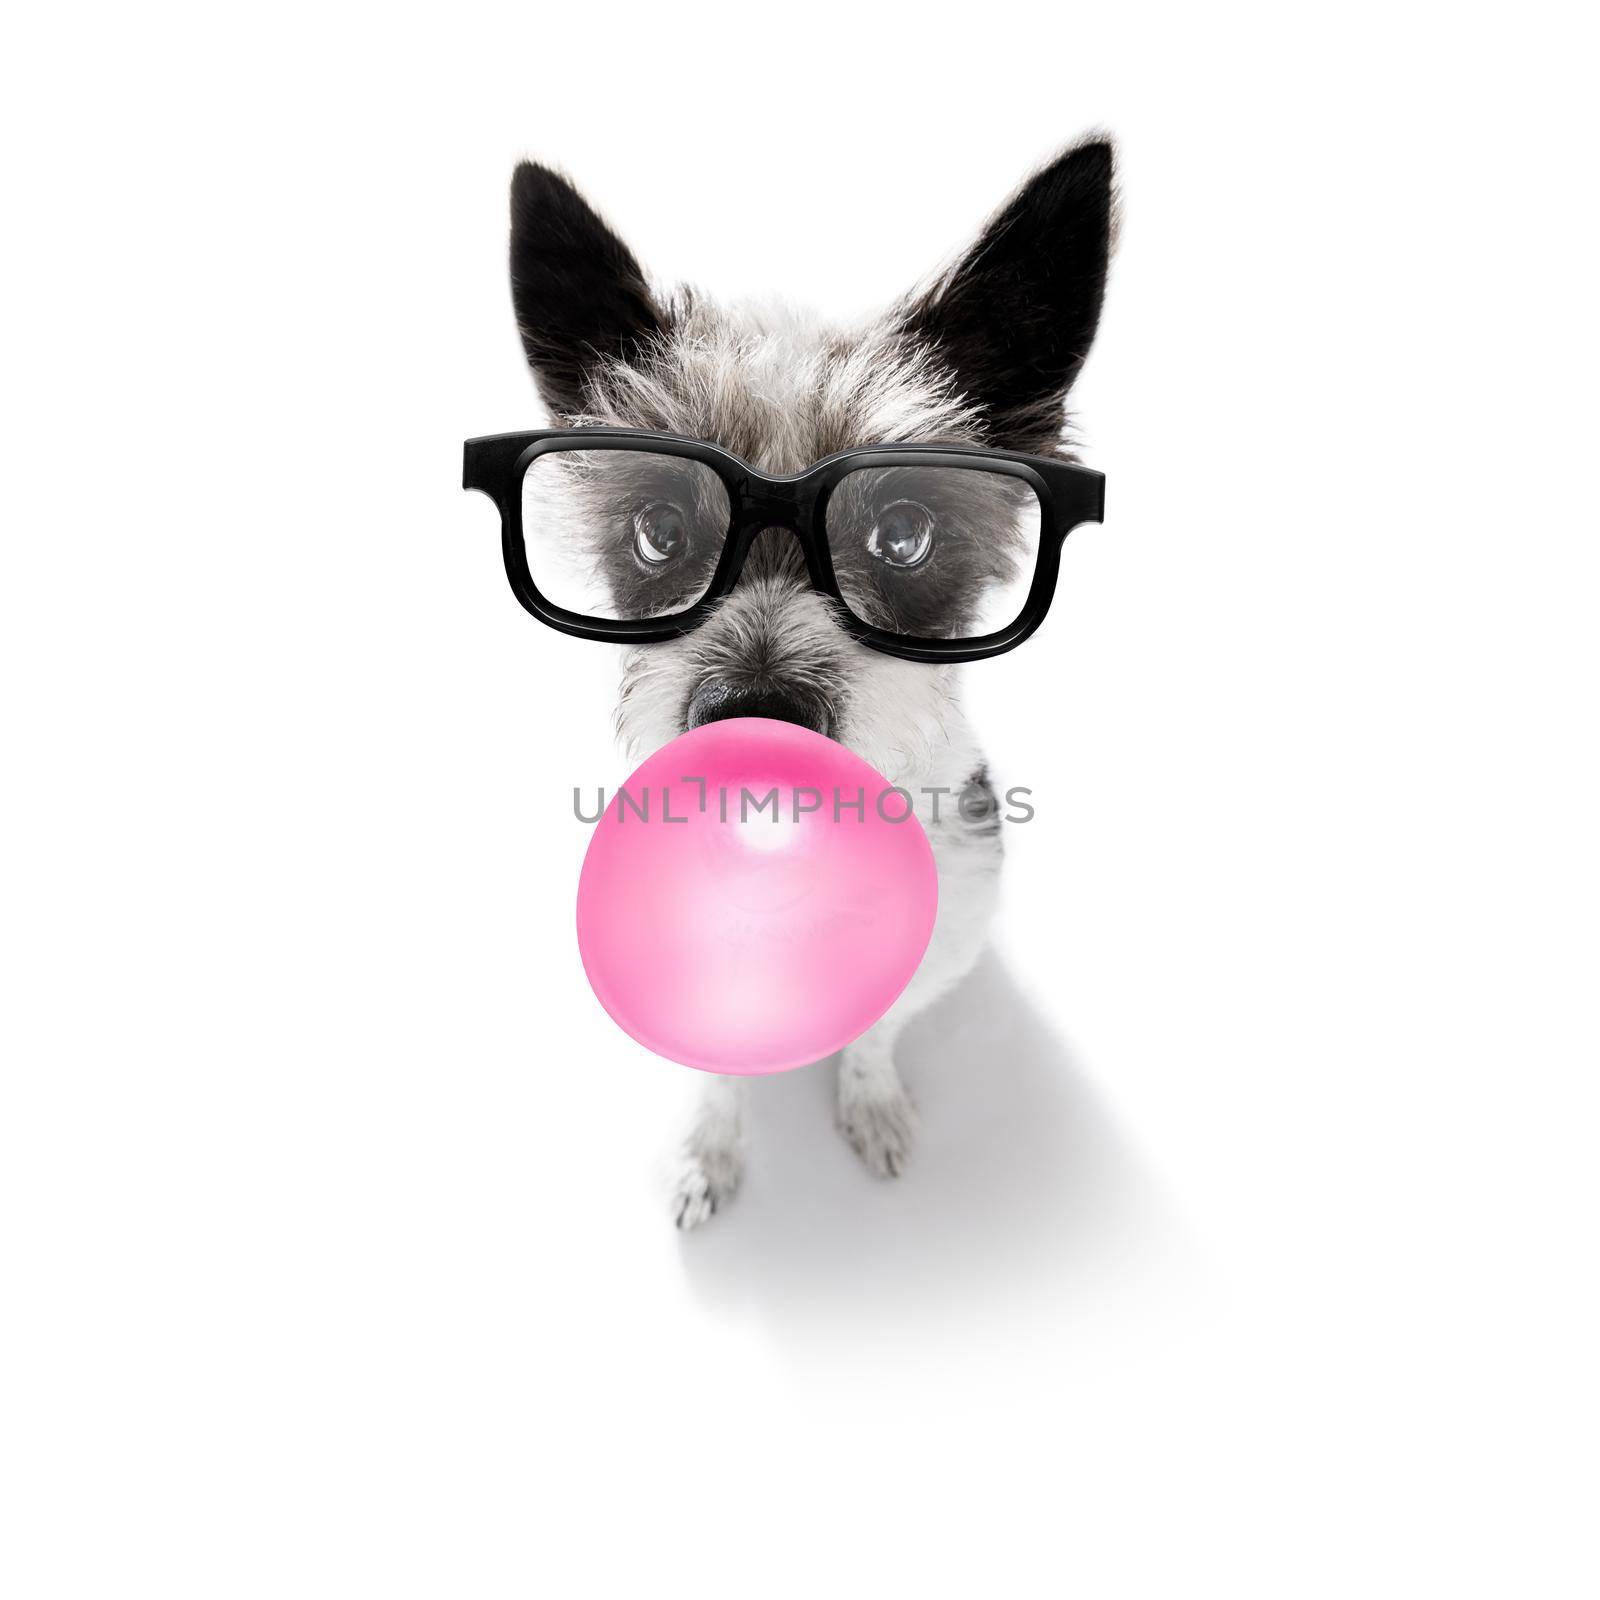 curious poodle dog looking up to owner waiting or sitting patient to play or go for a walk with  chewing bubble gum and reading glasses ,   isolated on white background